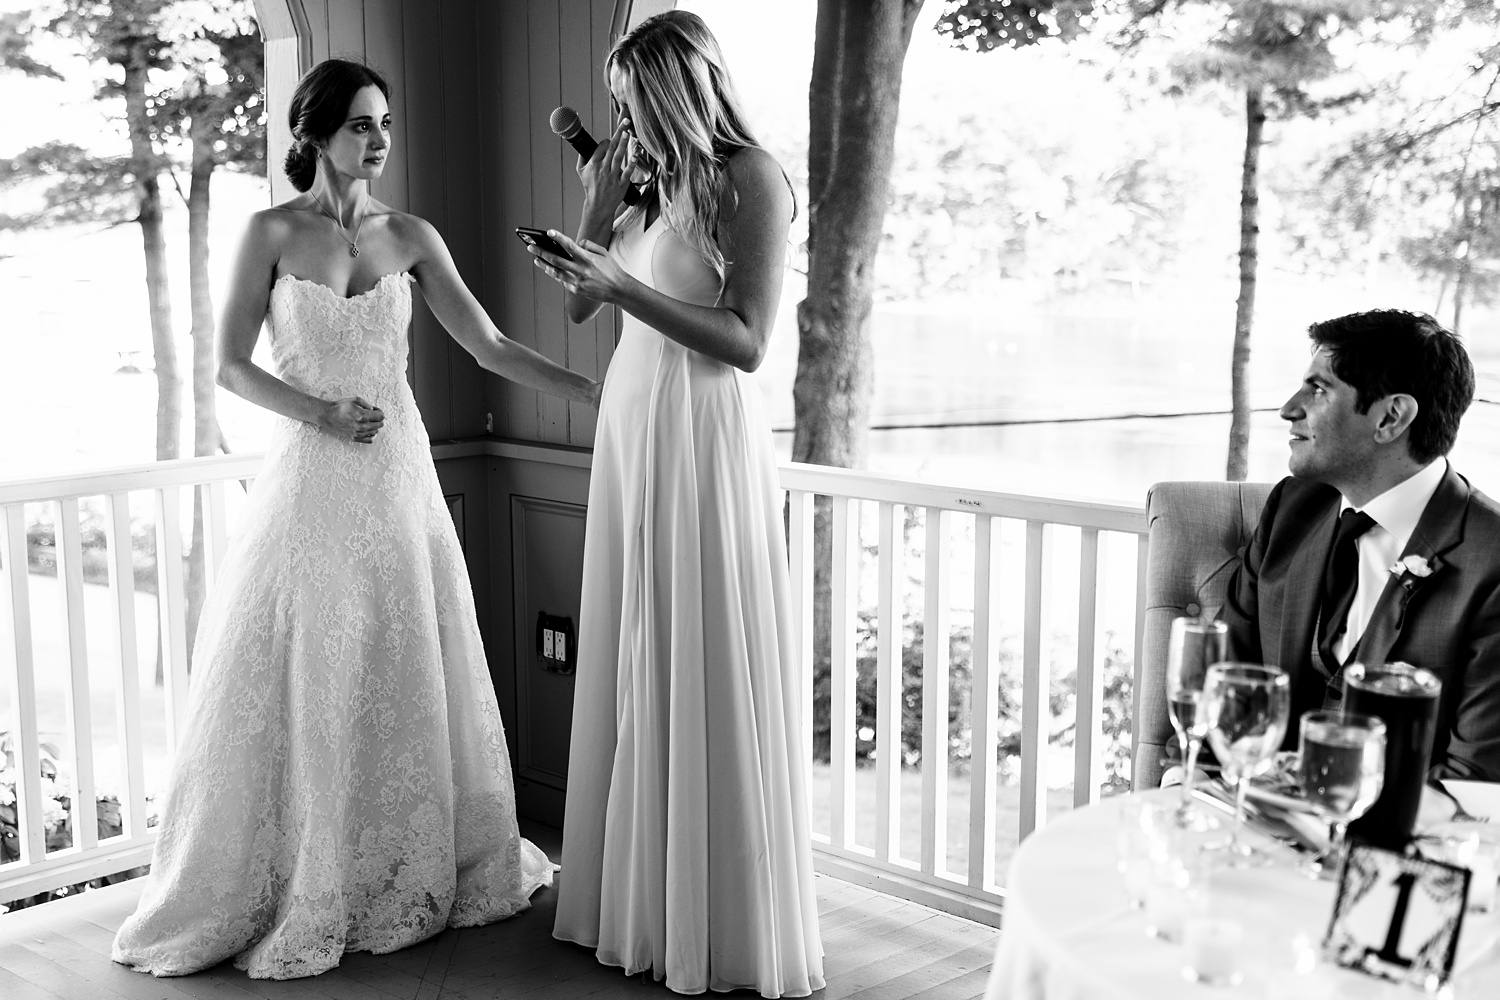 The sister of the bride tears up and the bride comforts her at York Golf and Tennis Club in Maine